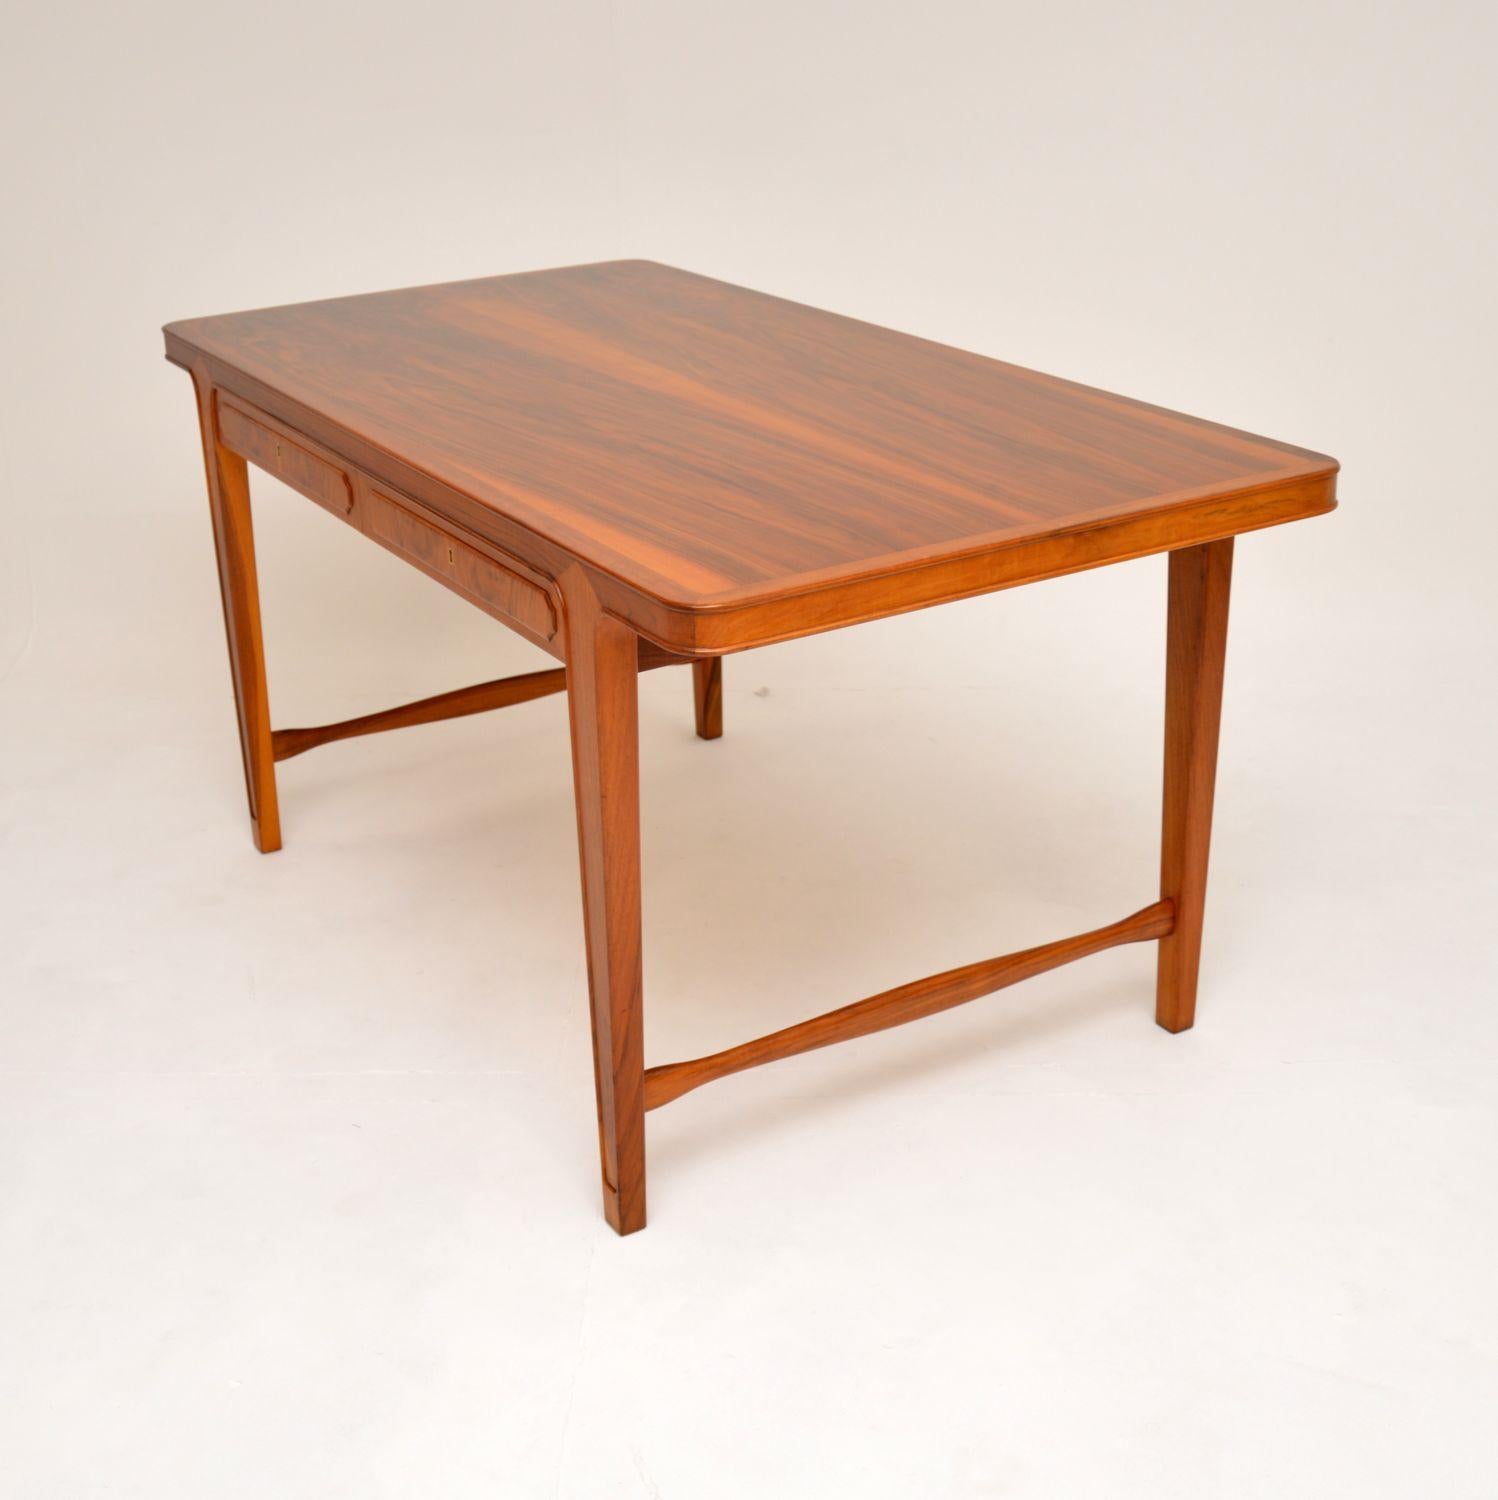 1960's Vintage Swedish Walnut Desk In Good Condition For Sale In London, GB